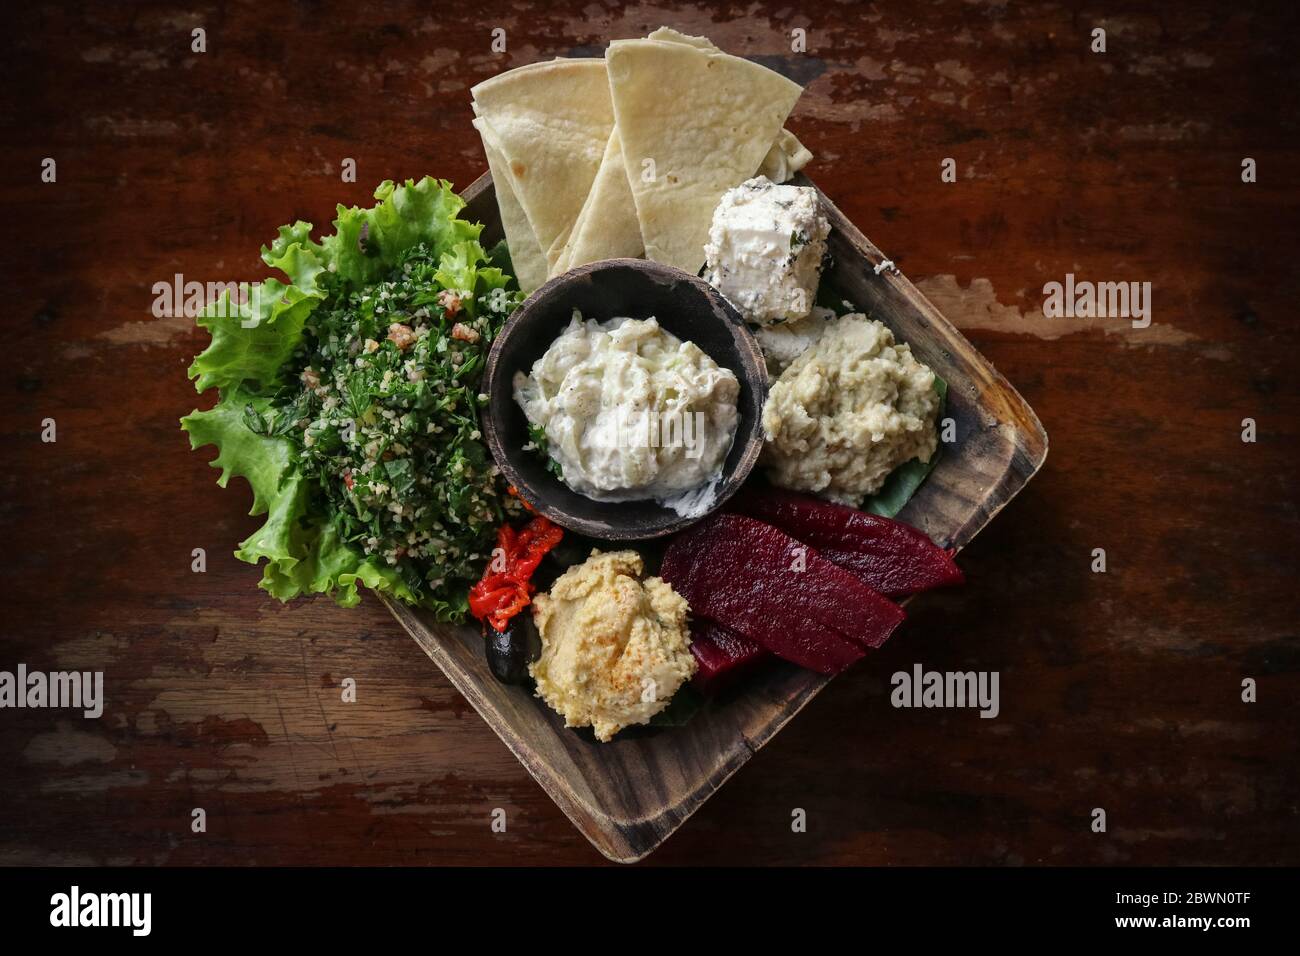 Mezze Platter with hummus, babaganoush, tabouli, roasted peppers, beet, feta cheese and kalamata olives served with pita bread on wooden background, t Stock Photo